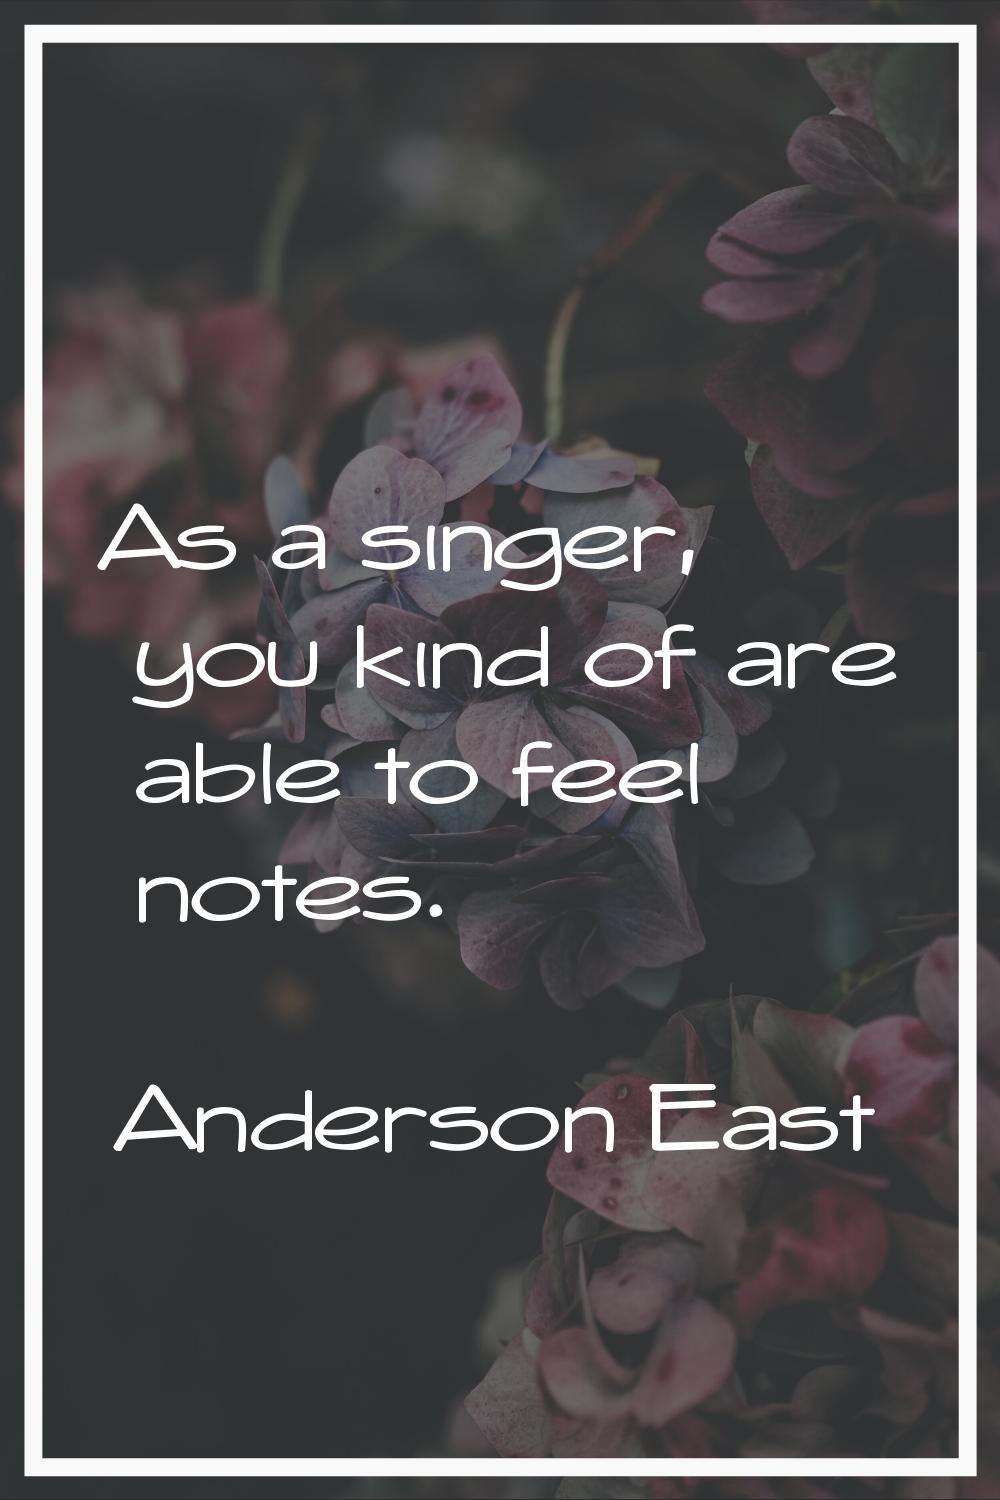 As a singer, you kind of are able to feel notes.